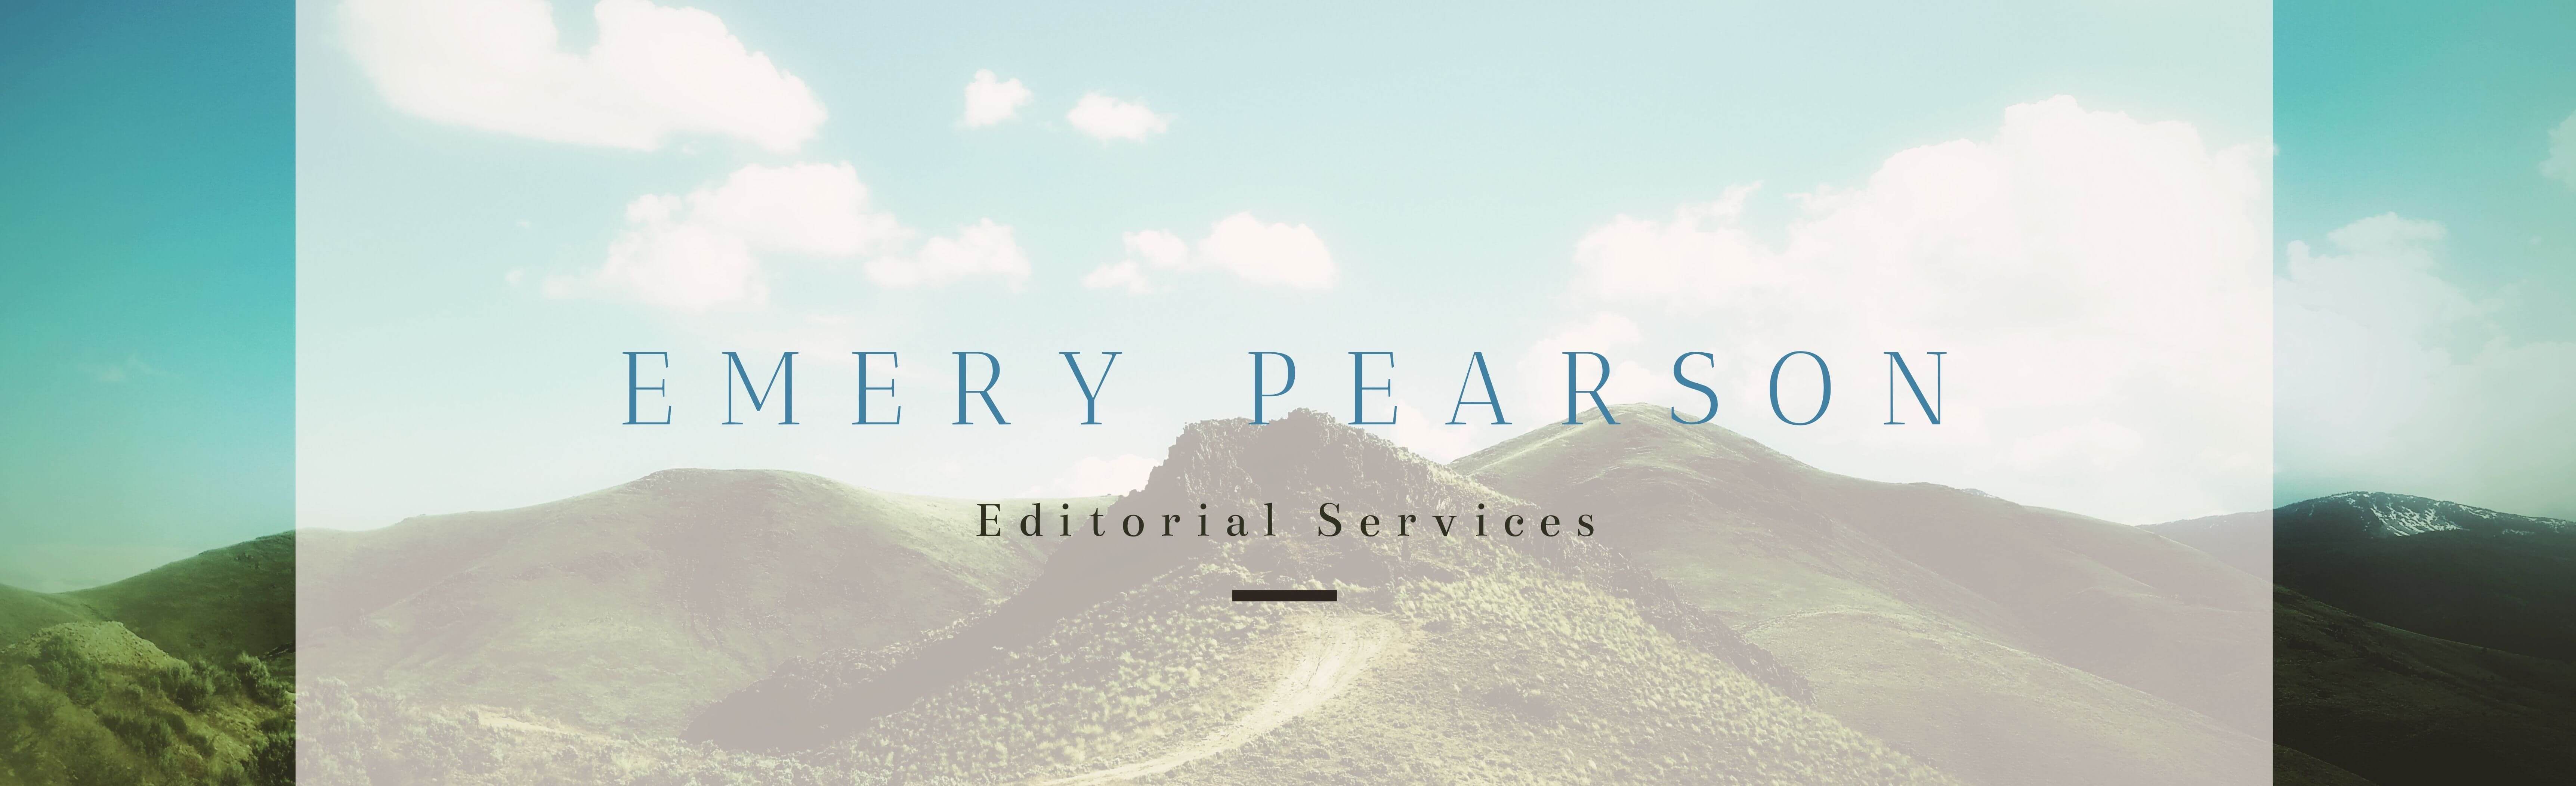 Emery Pearson Editorial Services overlayed on colorful hills